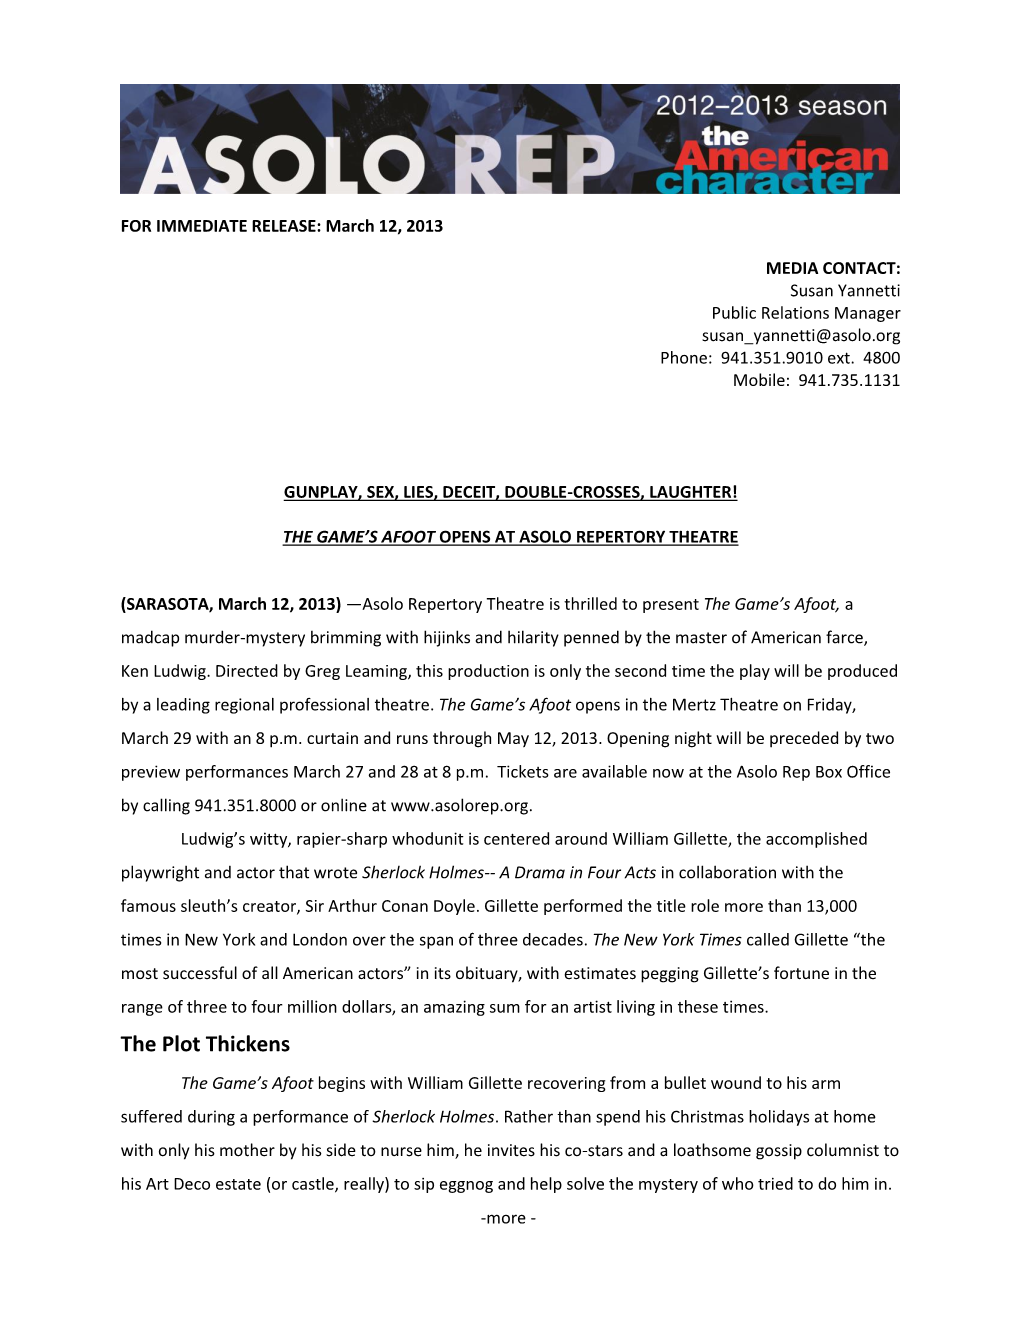 03/12/13 Asolo Rep the GAME's AFOOT Opens